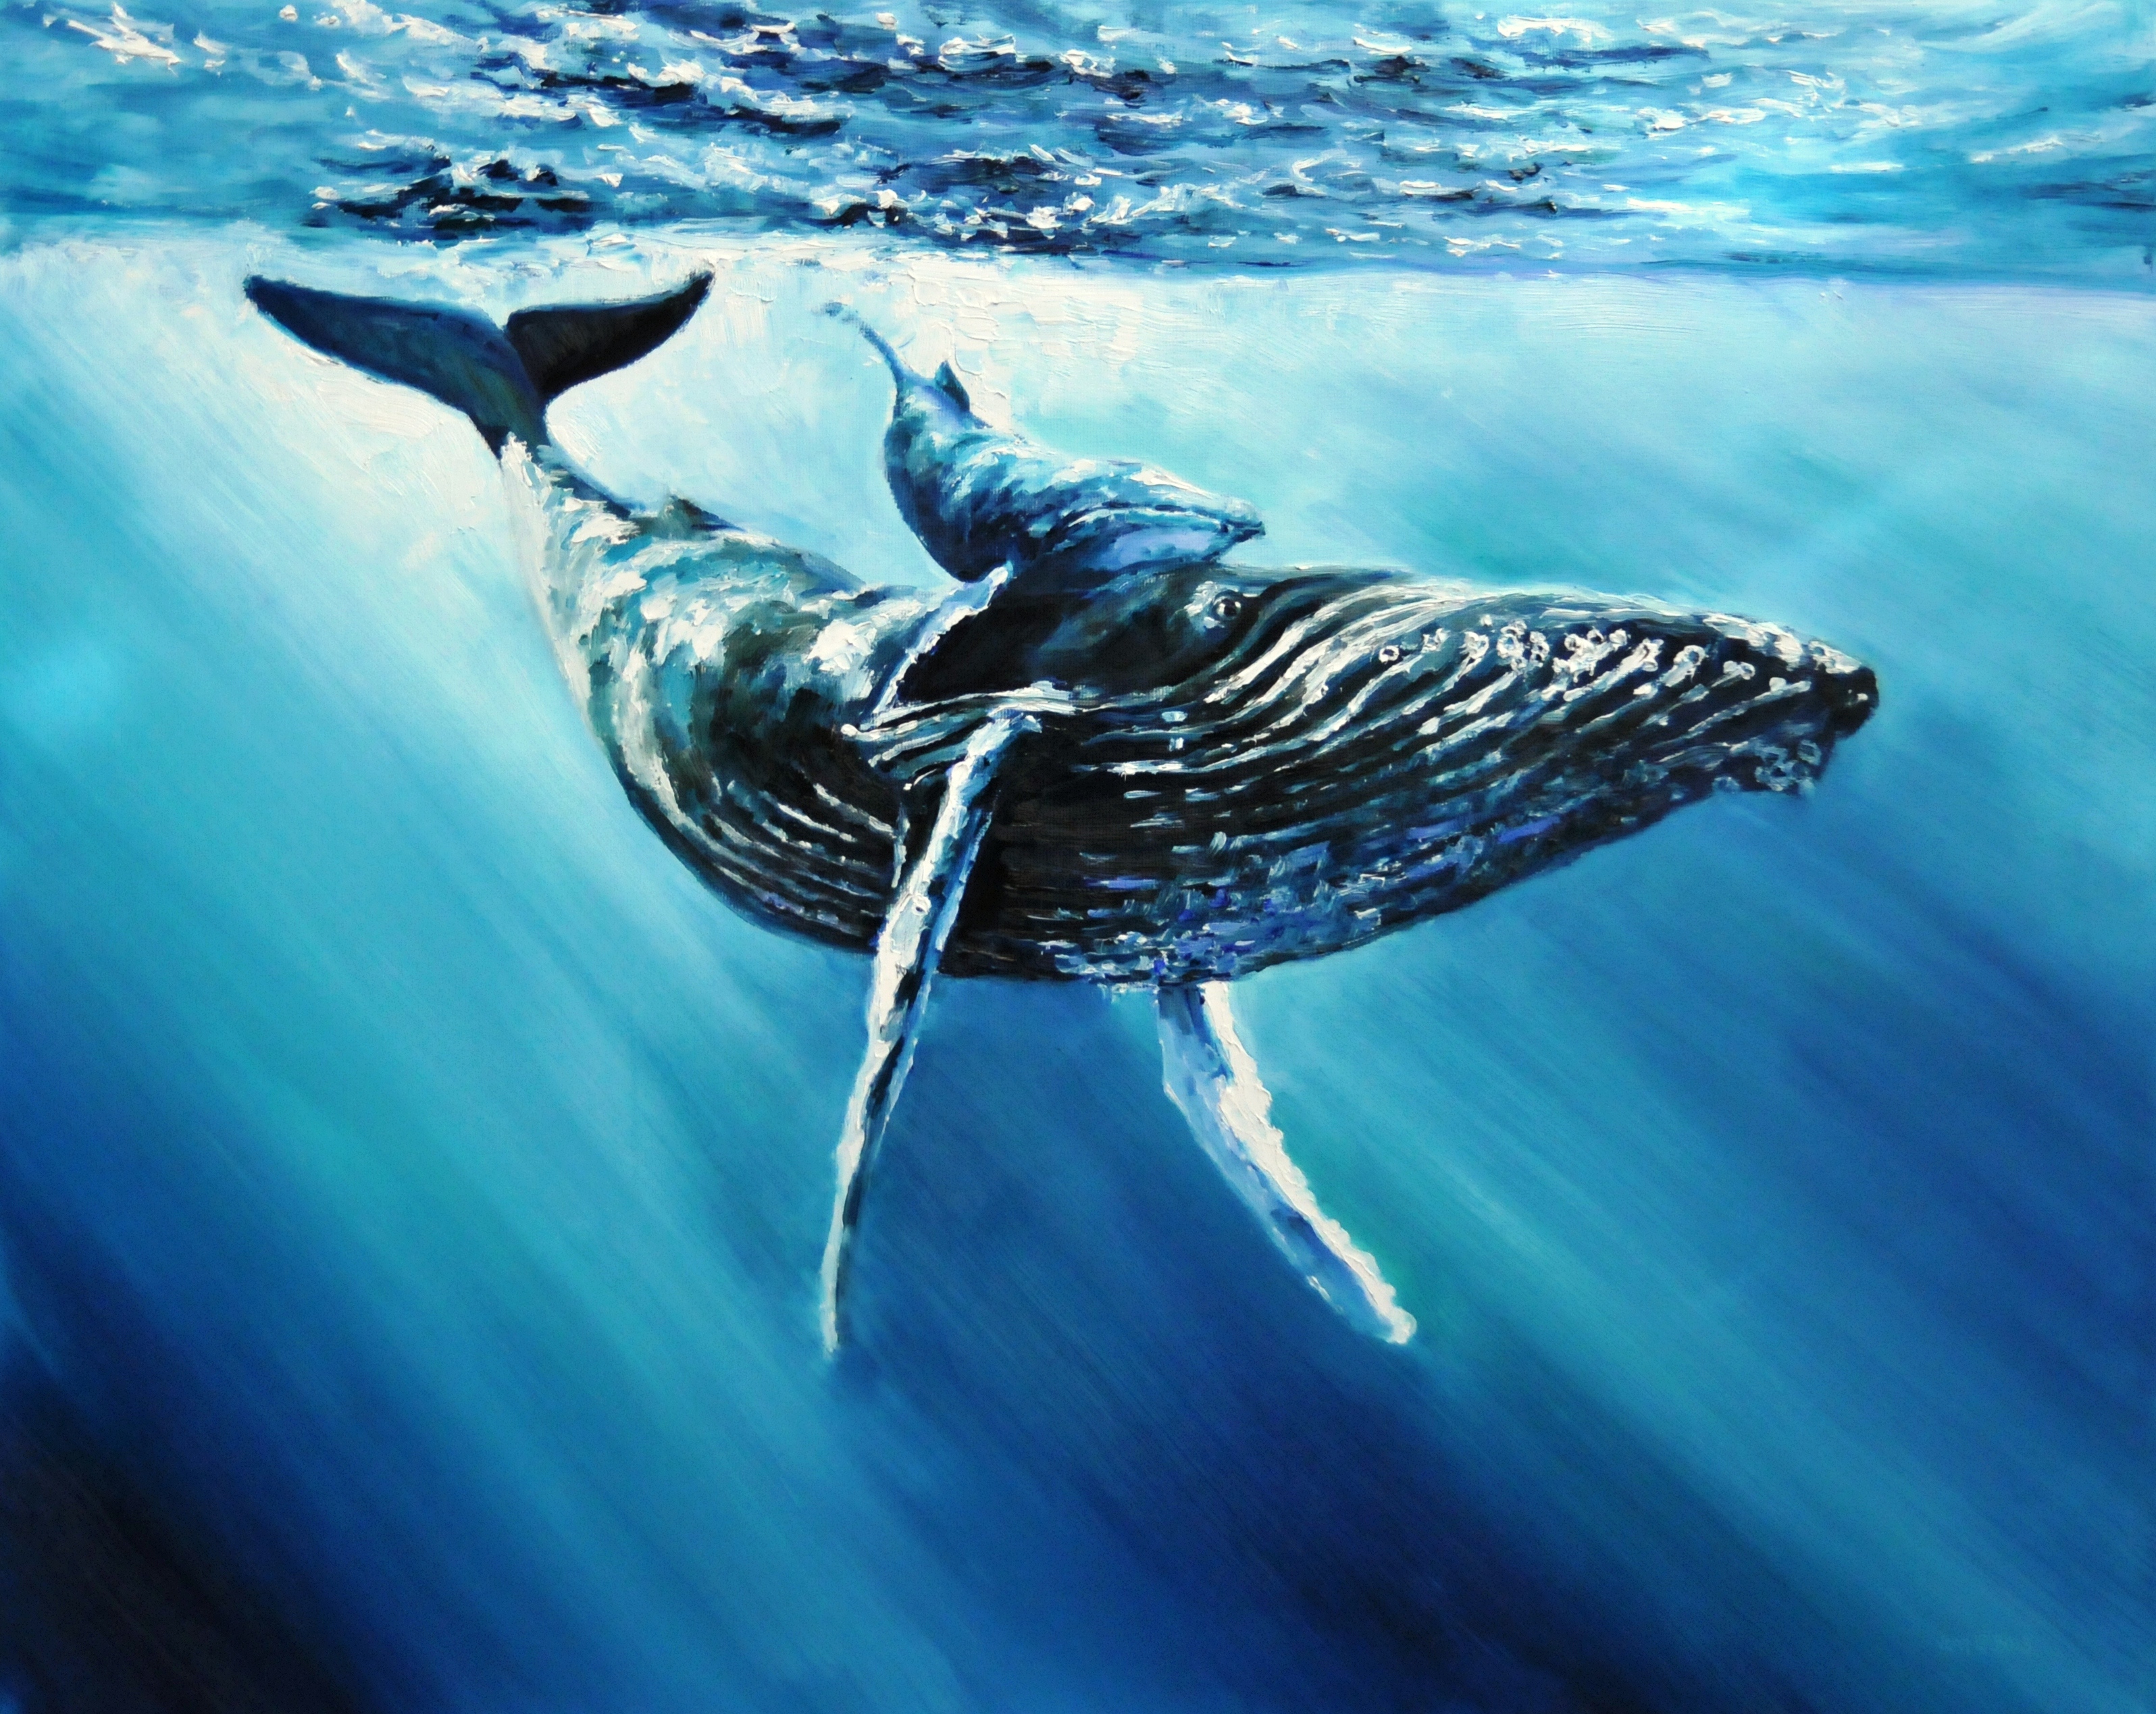 Humpback whale and calf | Oil paint on linen | Year: 2013 | Dimensions: 80x100cm